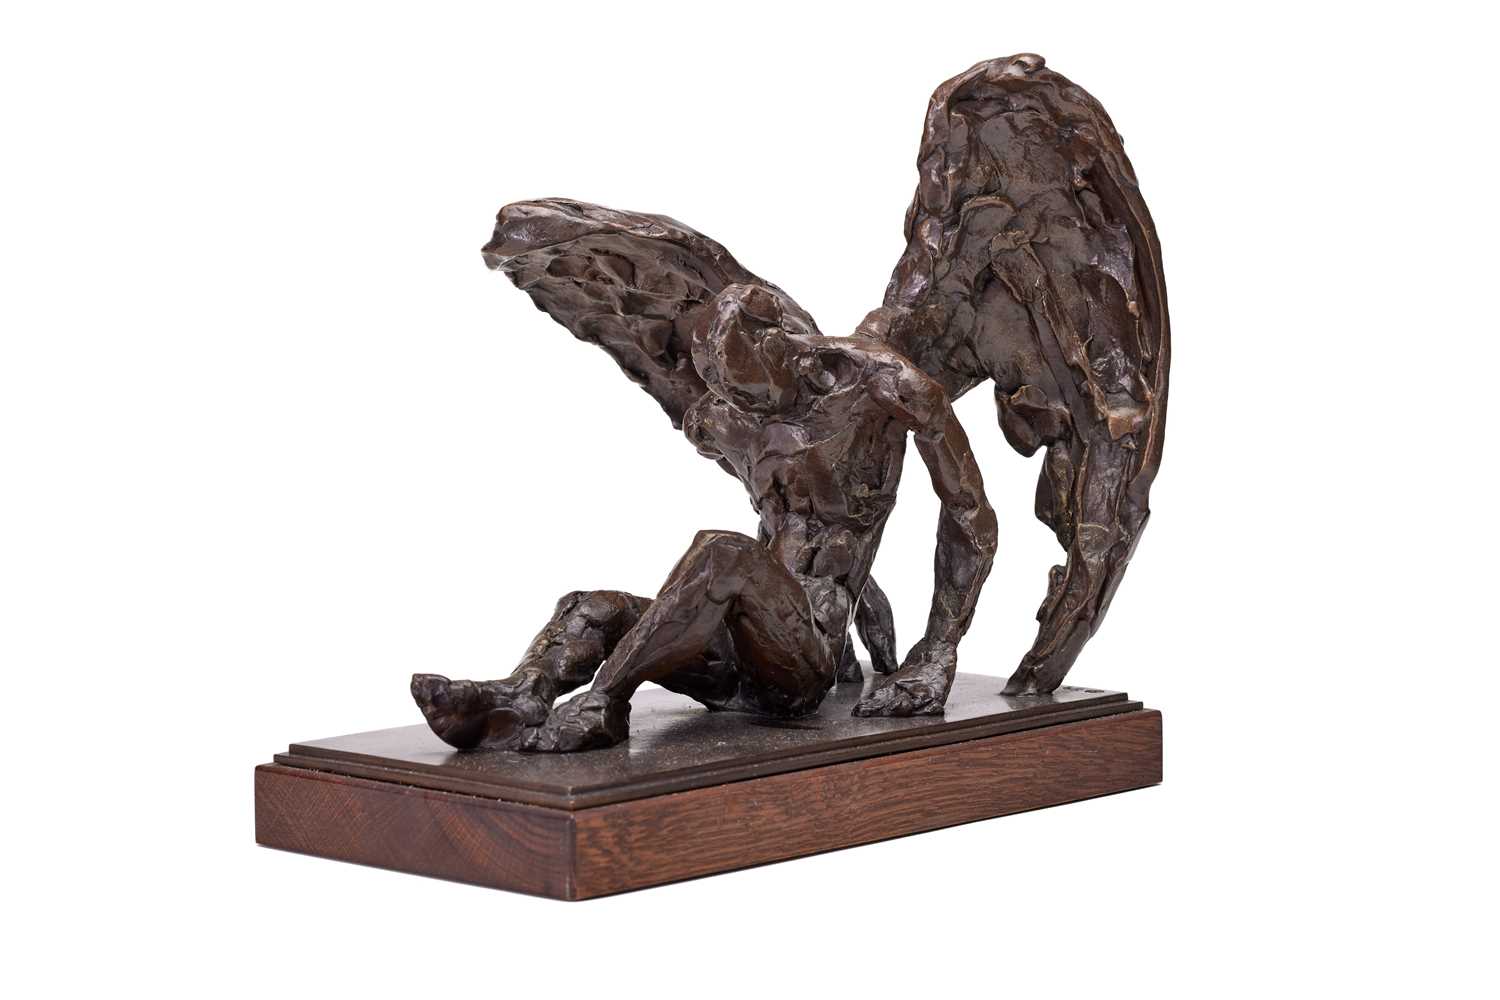 Sophie Dickens (b.1966) "St Matthew" Initialled and numbered 5/9, bronze, 29.5cm high - Image 2 of 2